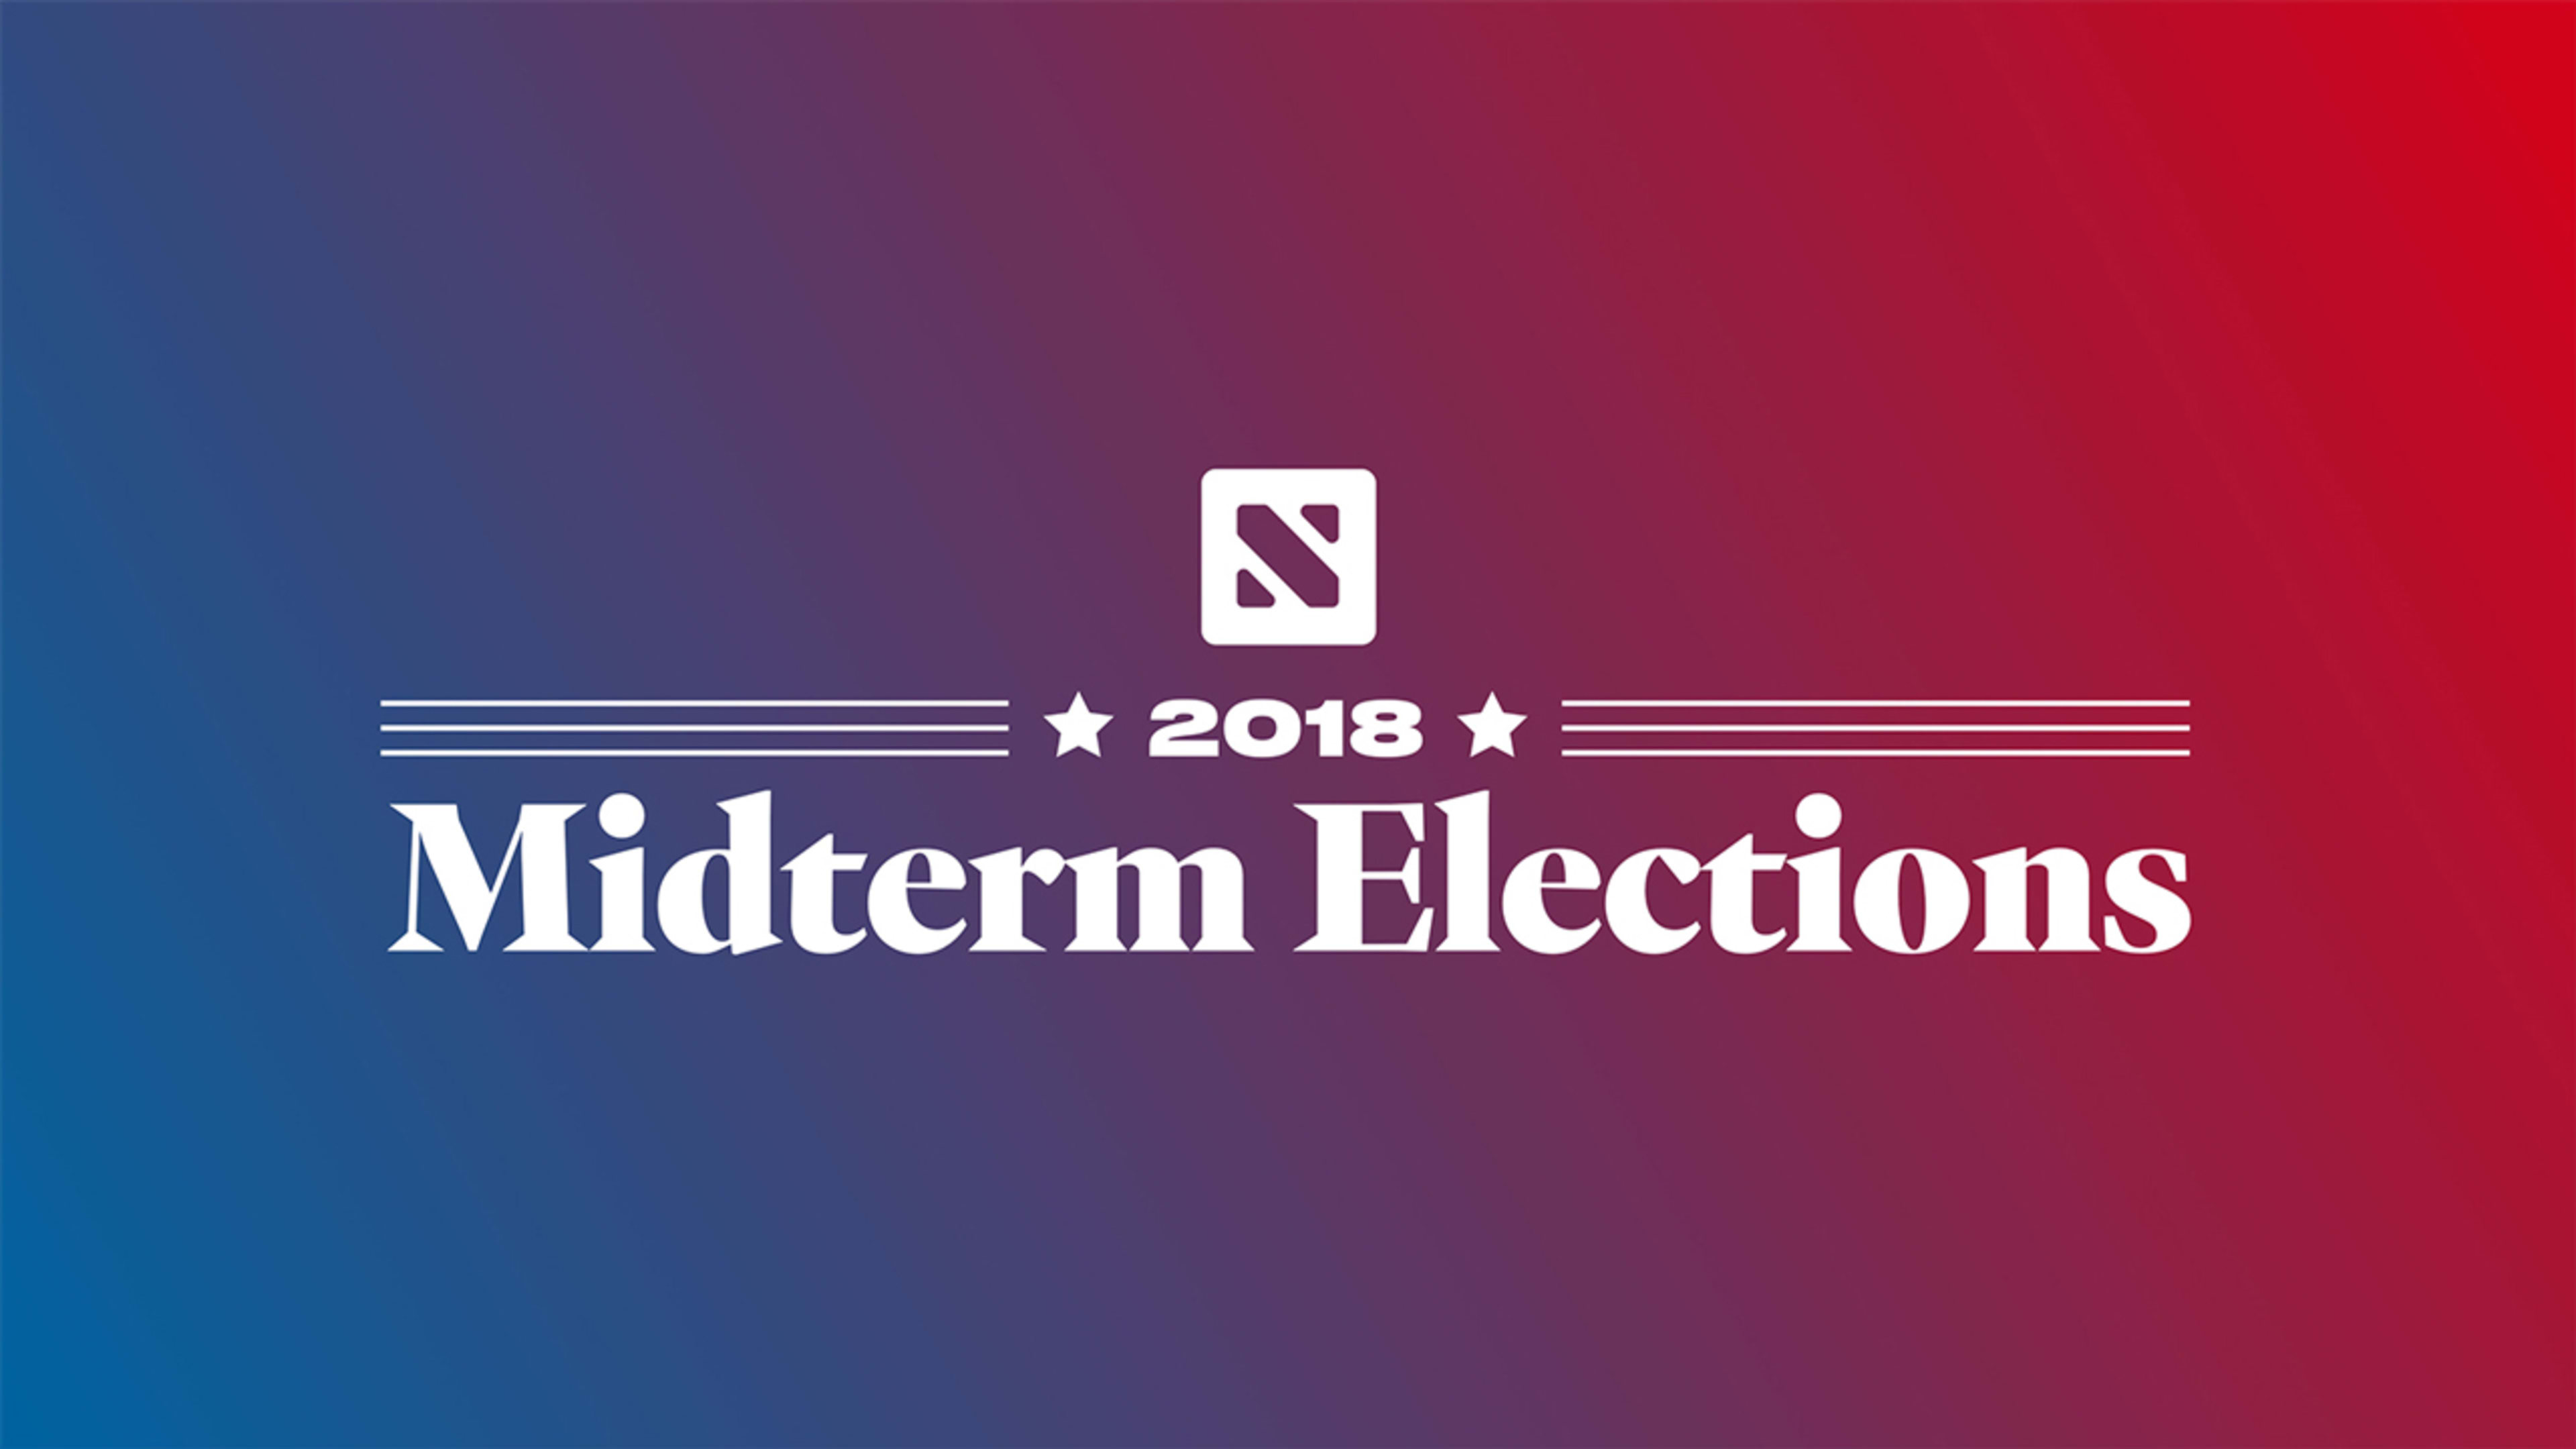 Apple News has a new section devoted entirely to the 2018 midterm elections